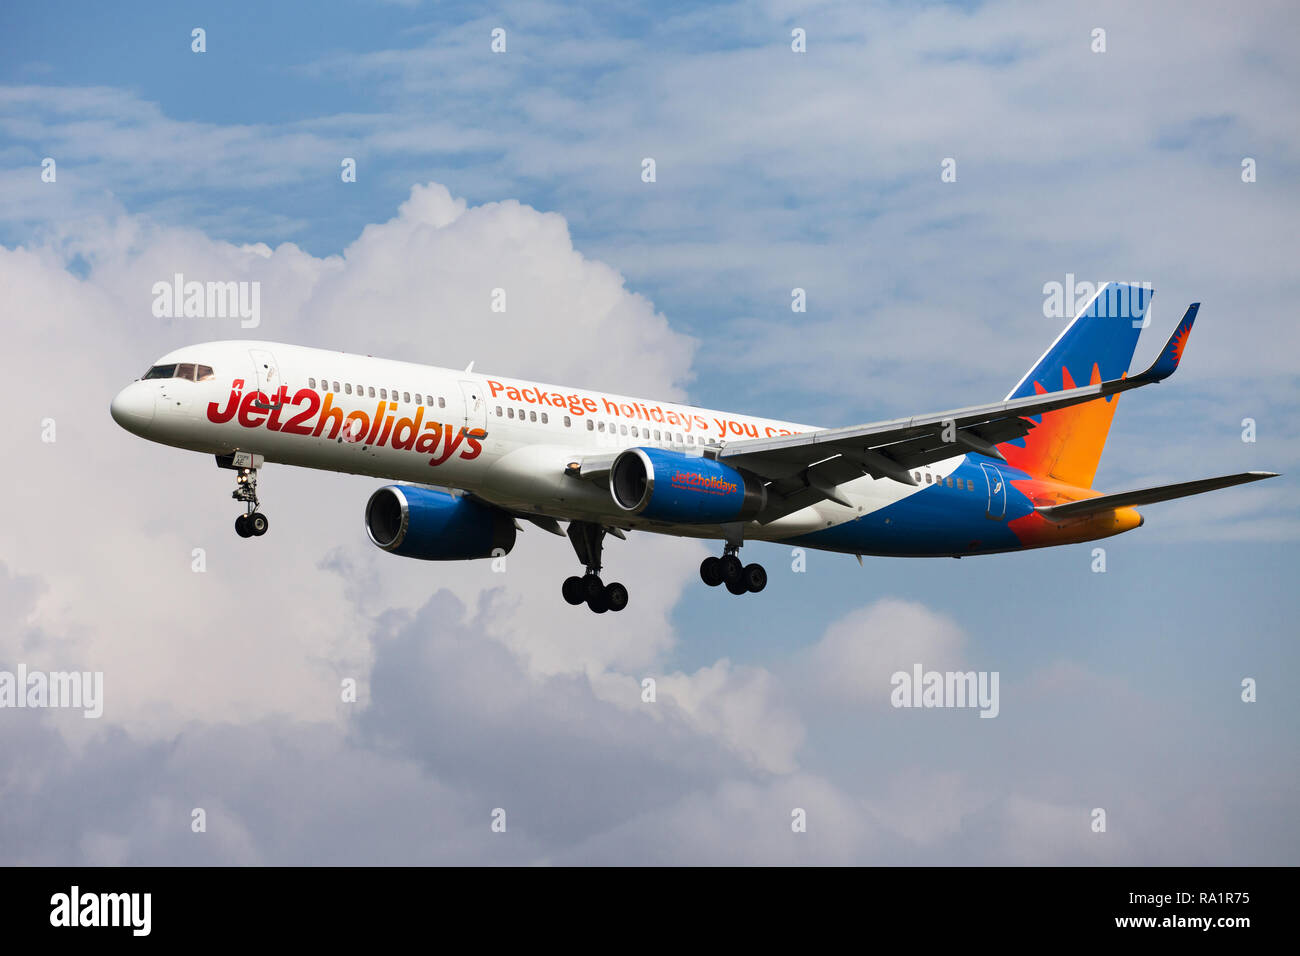 Barcelona, Spain - September 16, 2018: Jet2 Boeing 757-300 with Jet2holidays special livery approaching to El Prat Airport in Barcelona, Spain. Stock Photo